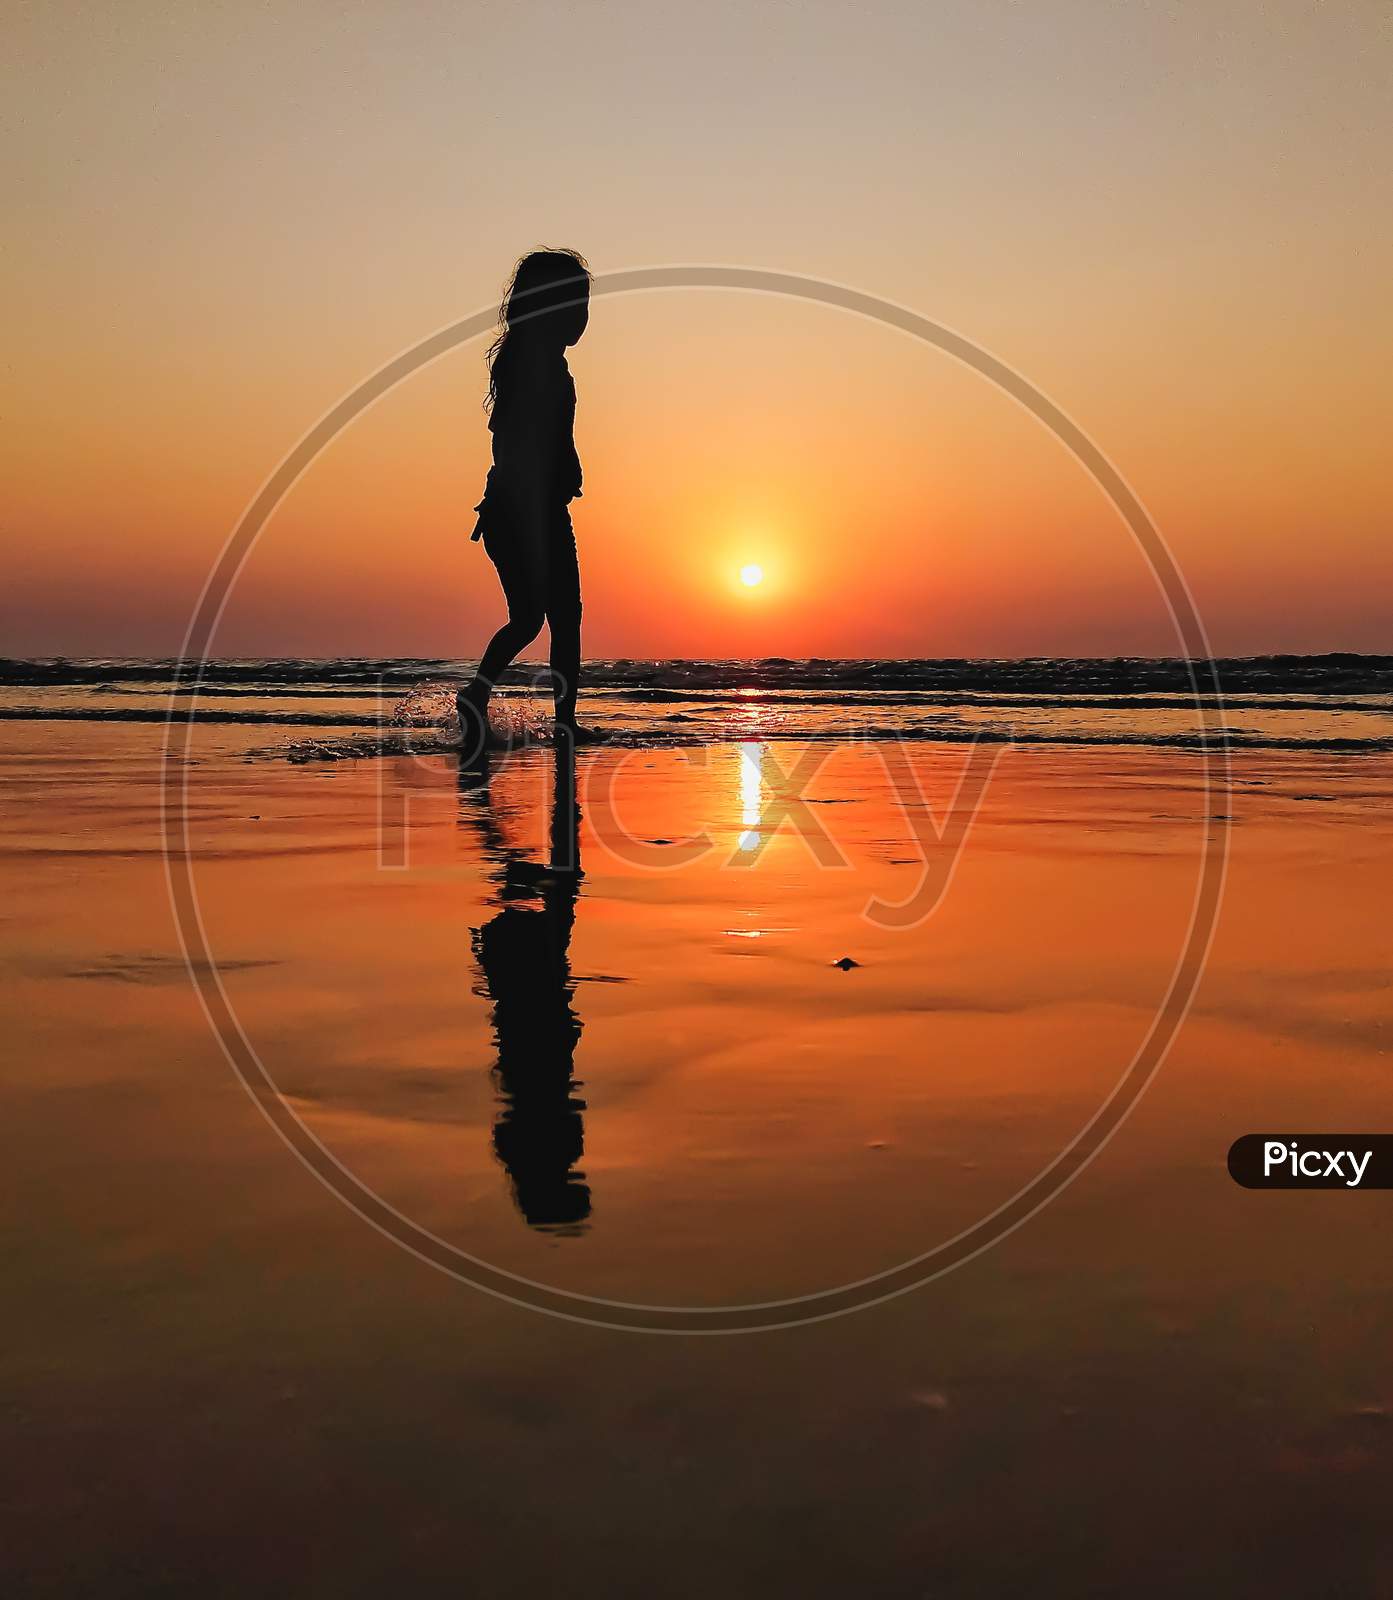 Too beautiful view of sunset and a child playing at seashore